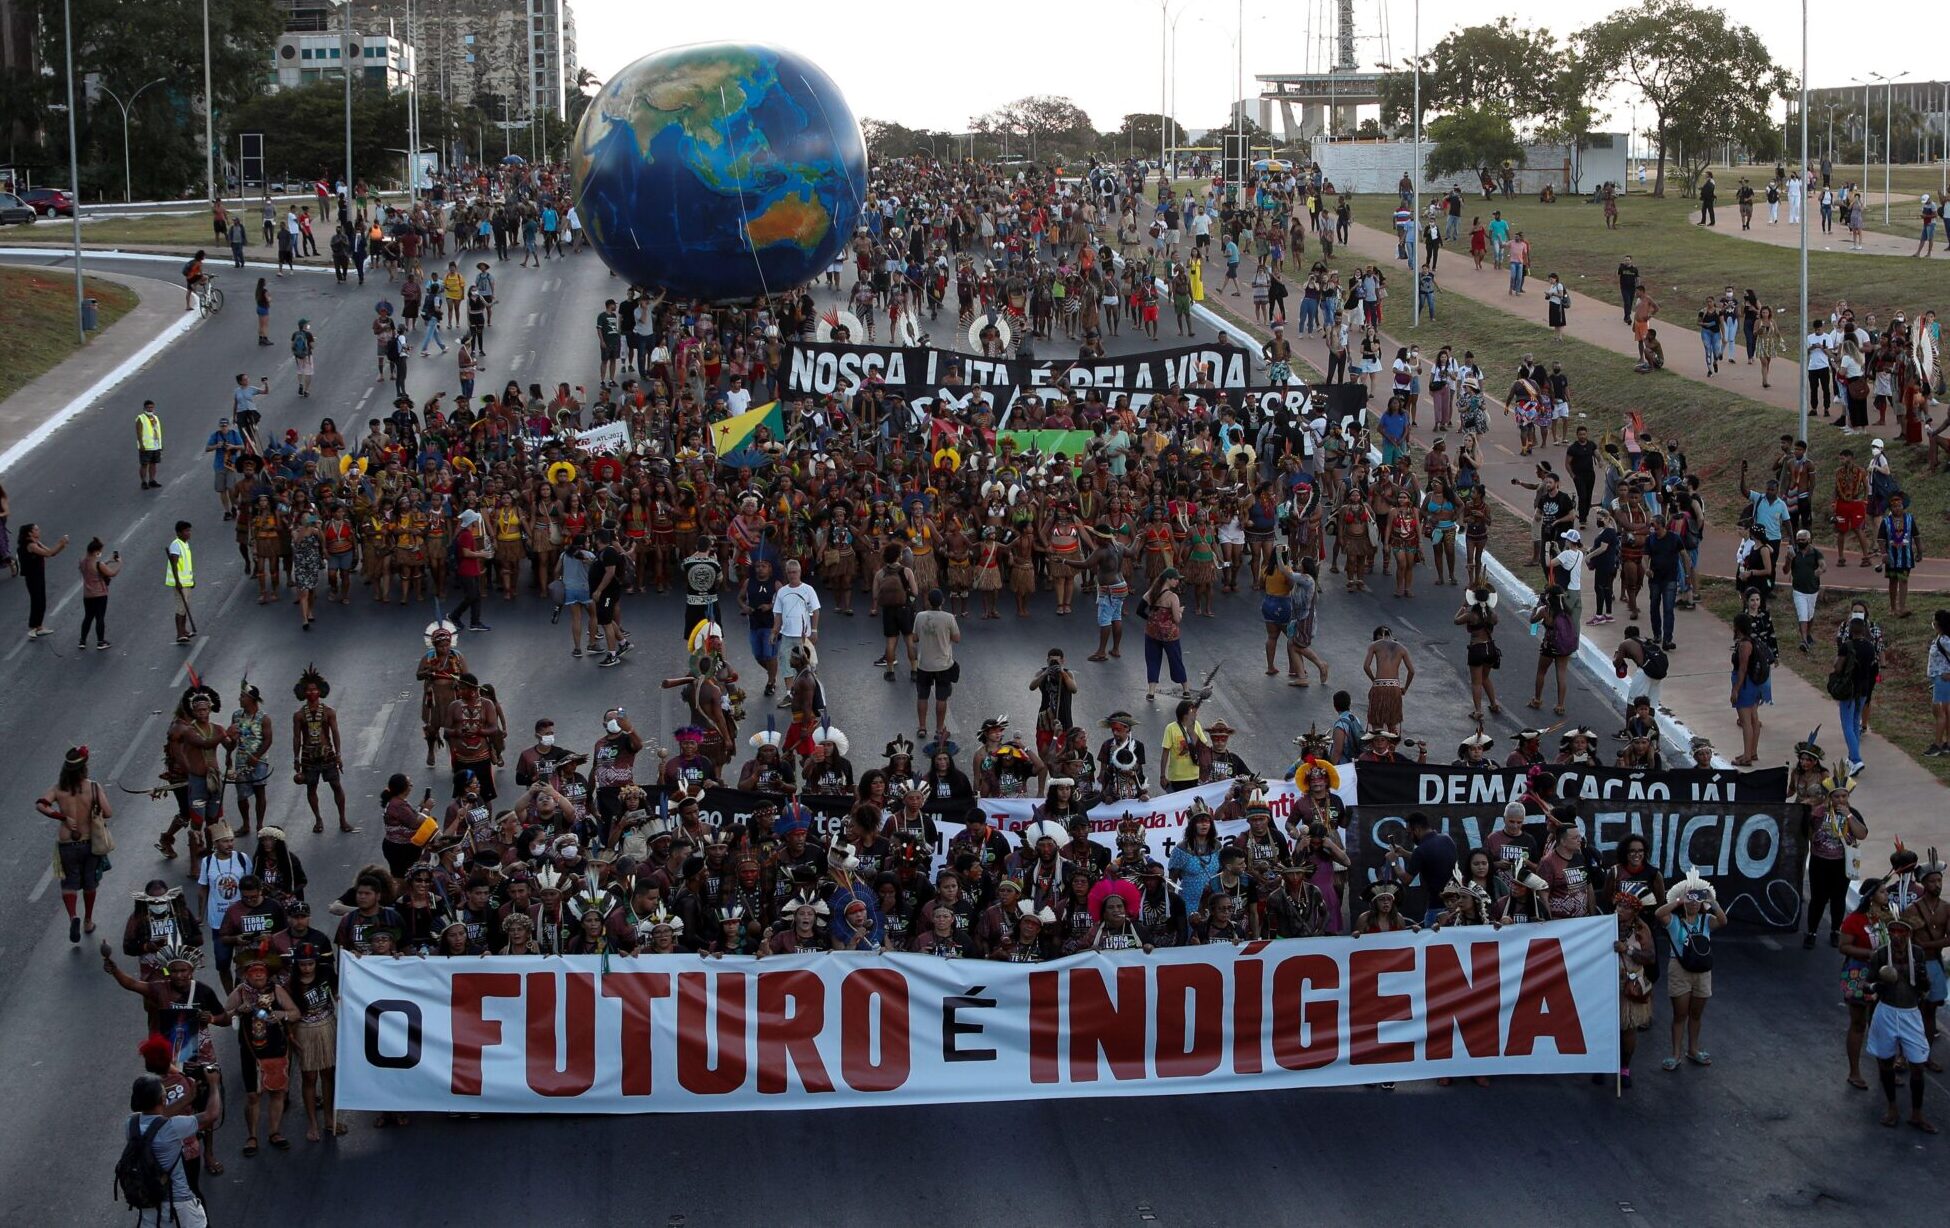 <p>Indigenous people protest against Brazilian president Jair Bolsonaro and in favour of the demarcation of indigenous lands, in Brasília, April 2022. The group carries a banner with the words ‘The future is indigenous’ (Image: Adriano Machado / Alamy)</p>